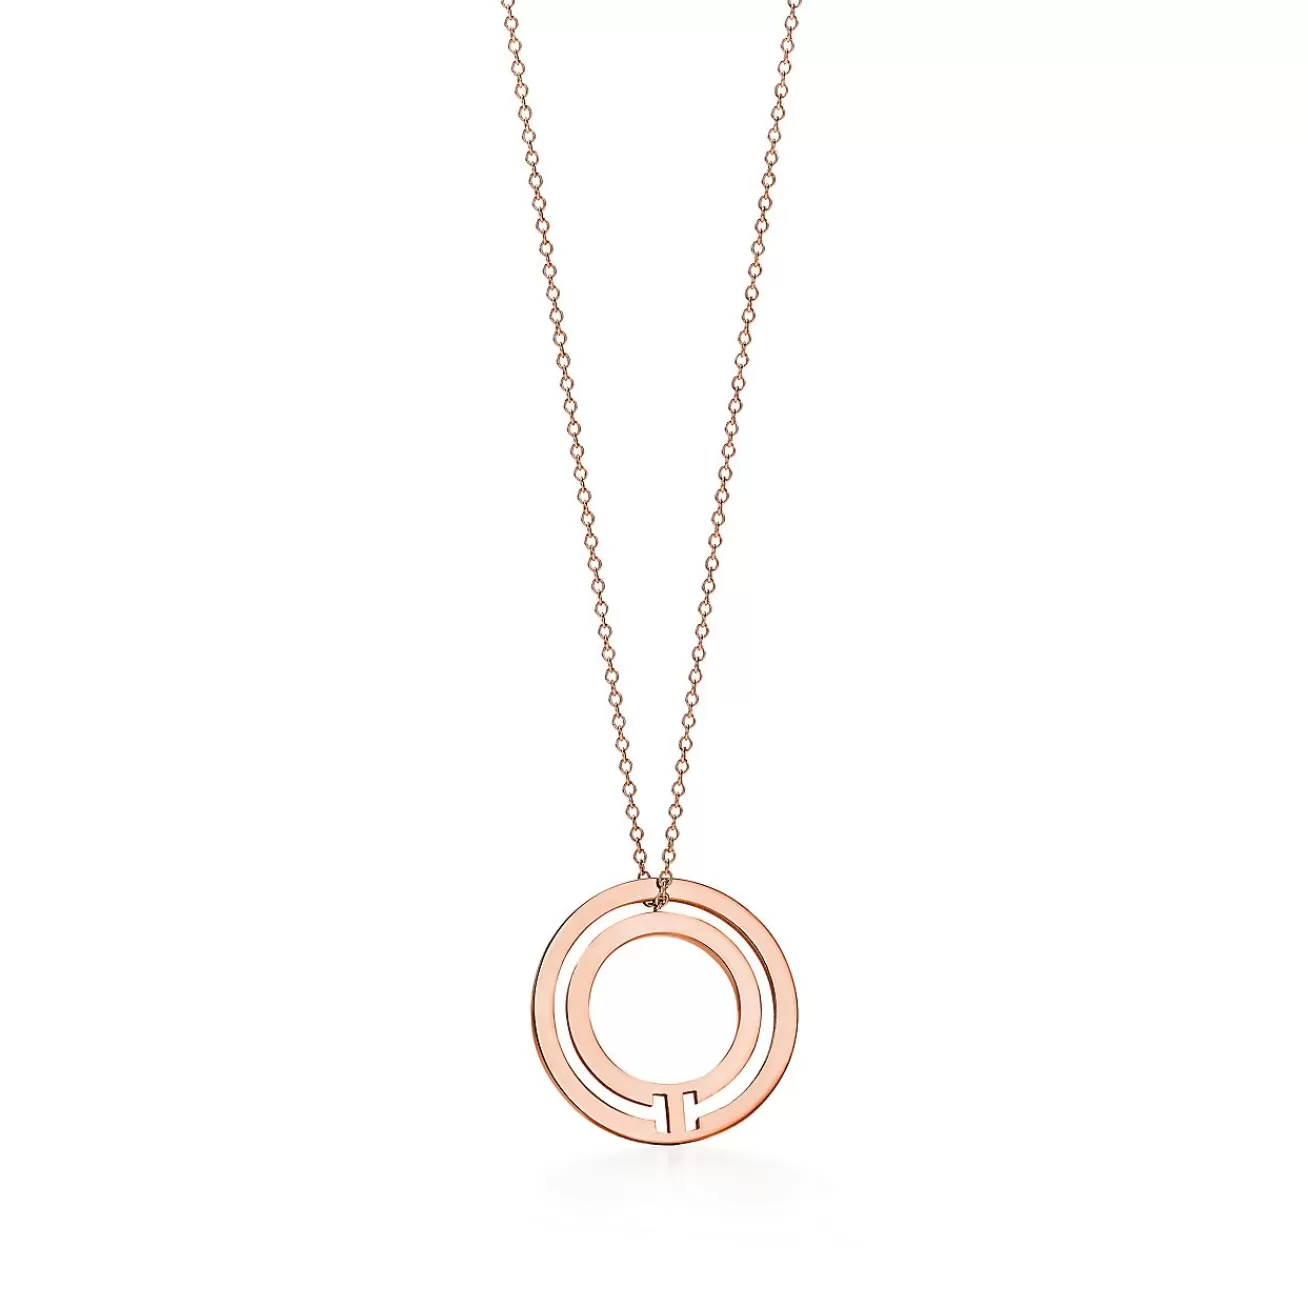 Tiffany & Co. Tiffany T circle pendant in 18k rose gold. | ^ Necklaces & Pendants | Rose Gold Jewelry